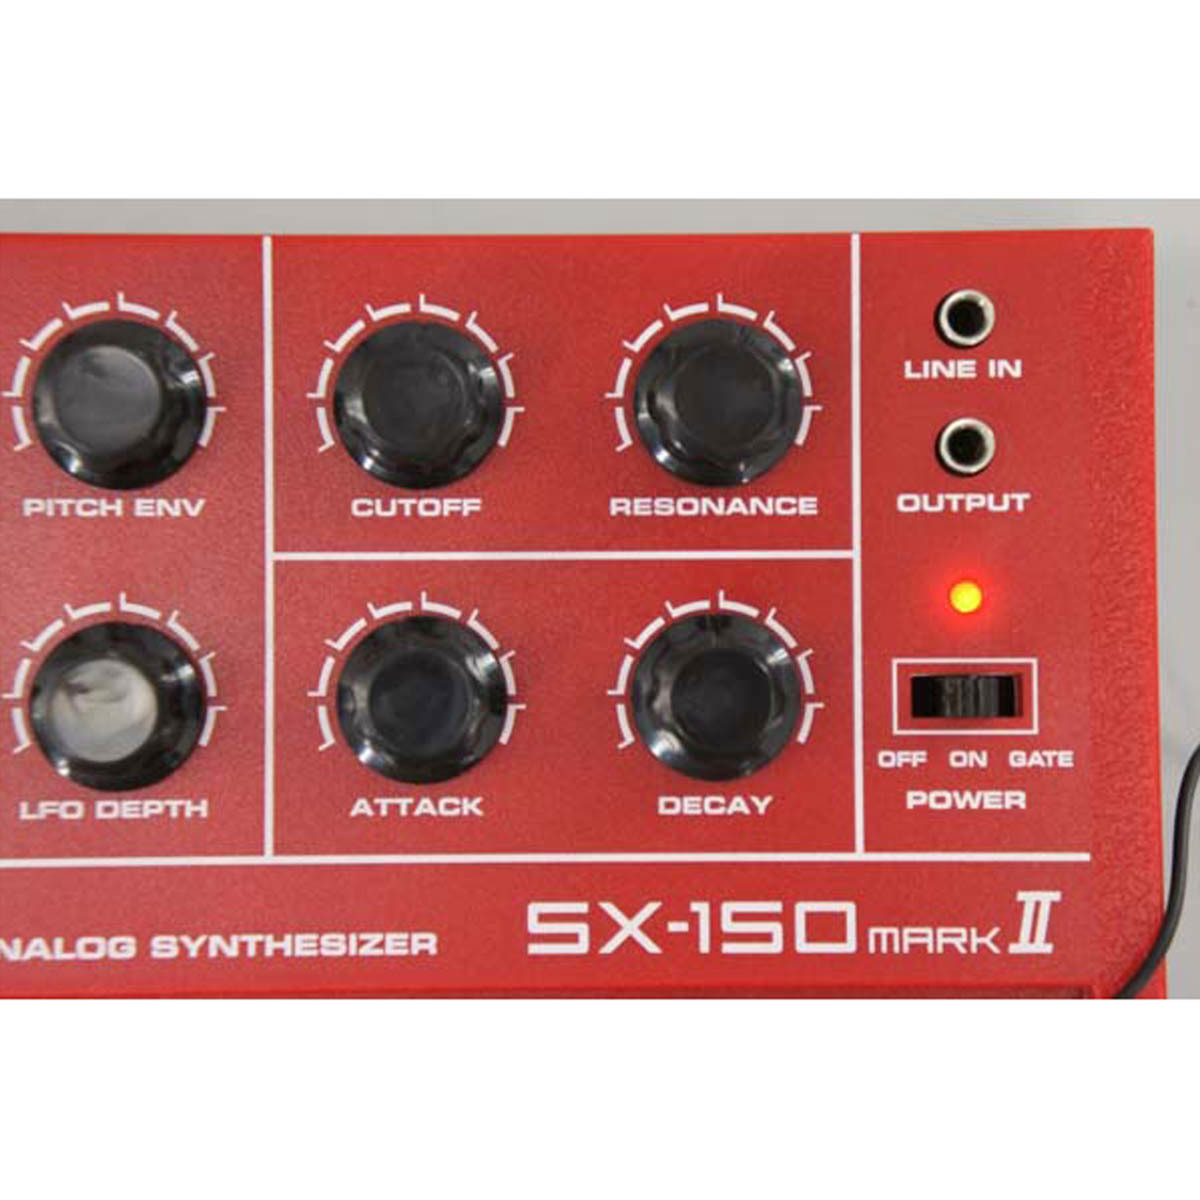 [PG] USED great number arrival SX-150MARK2 adult science Gakken ANALOG SY...[01212-0245]